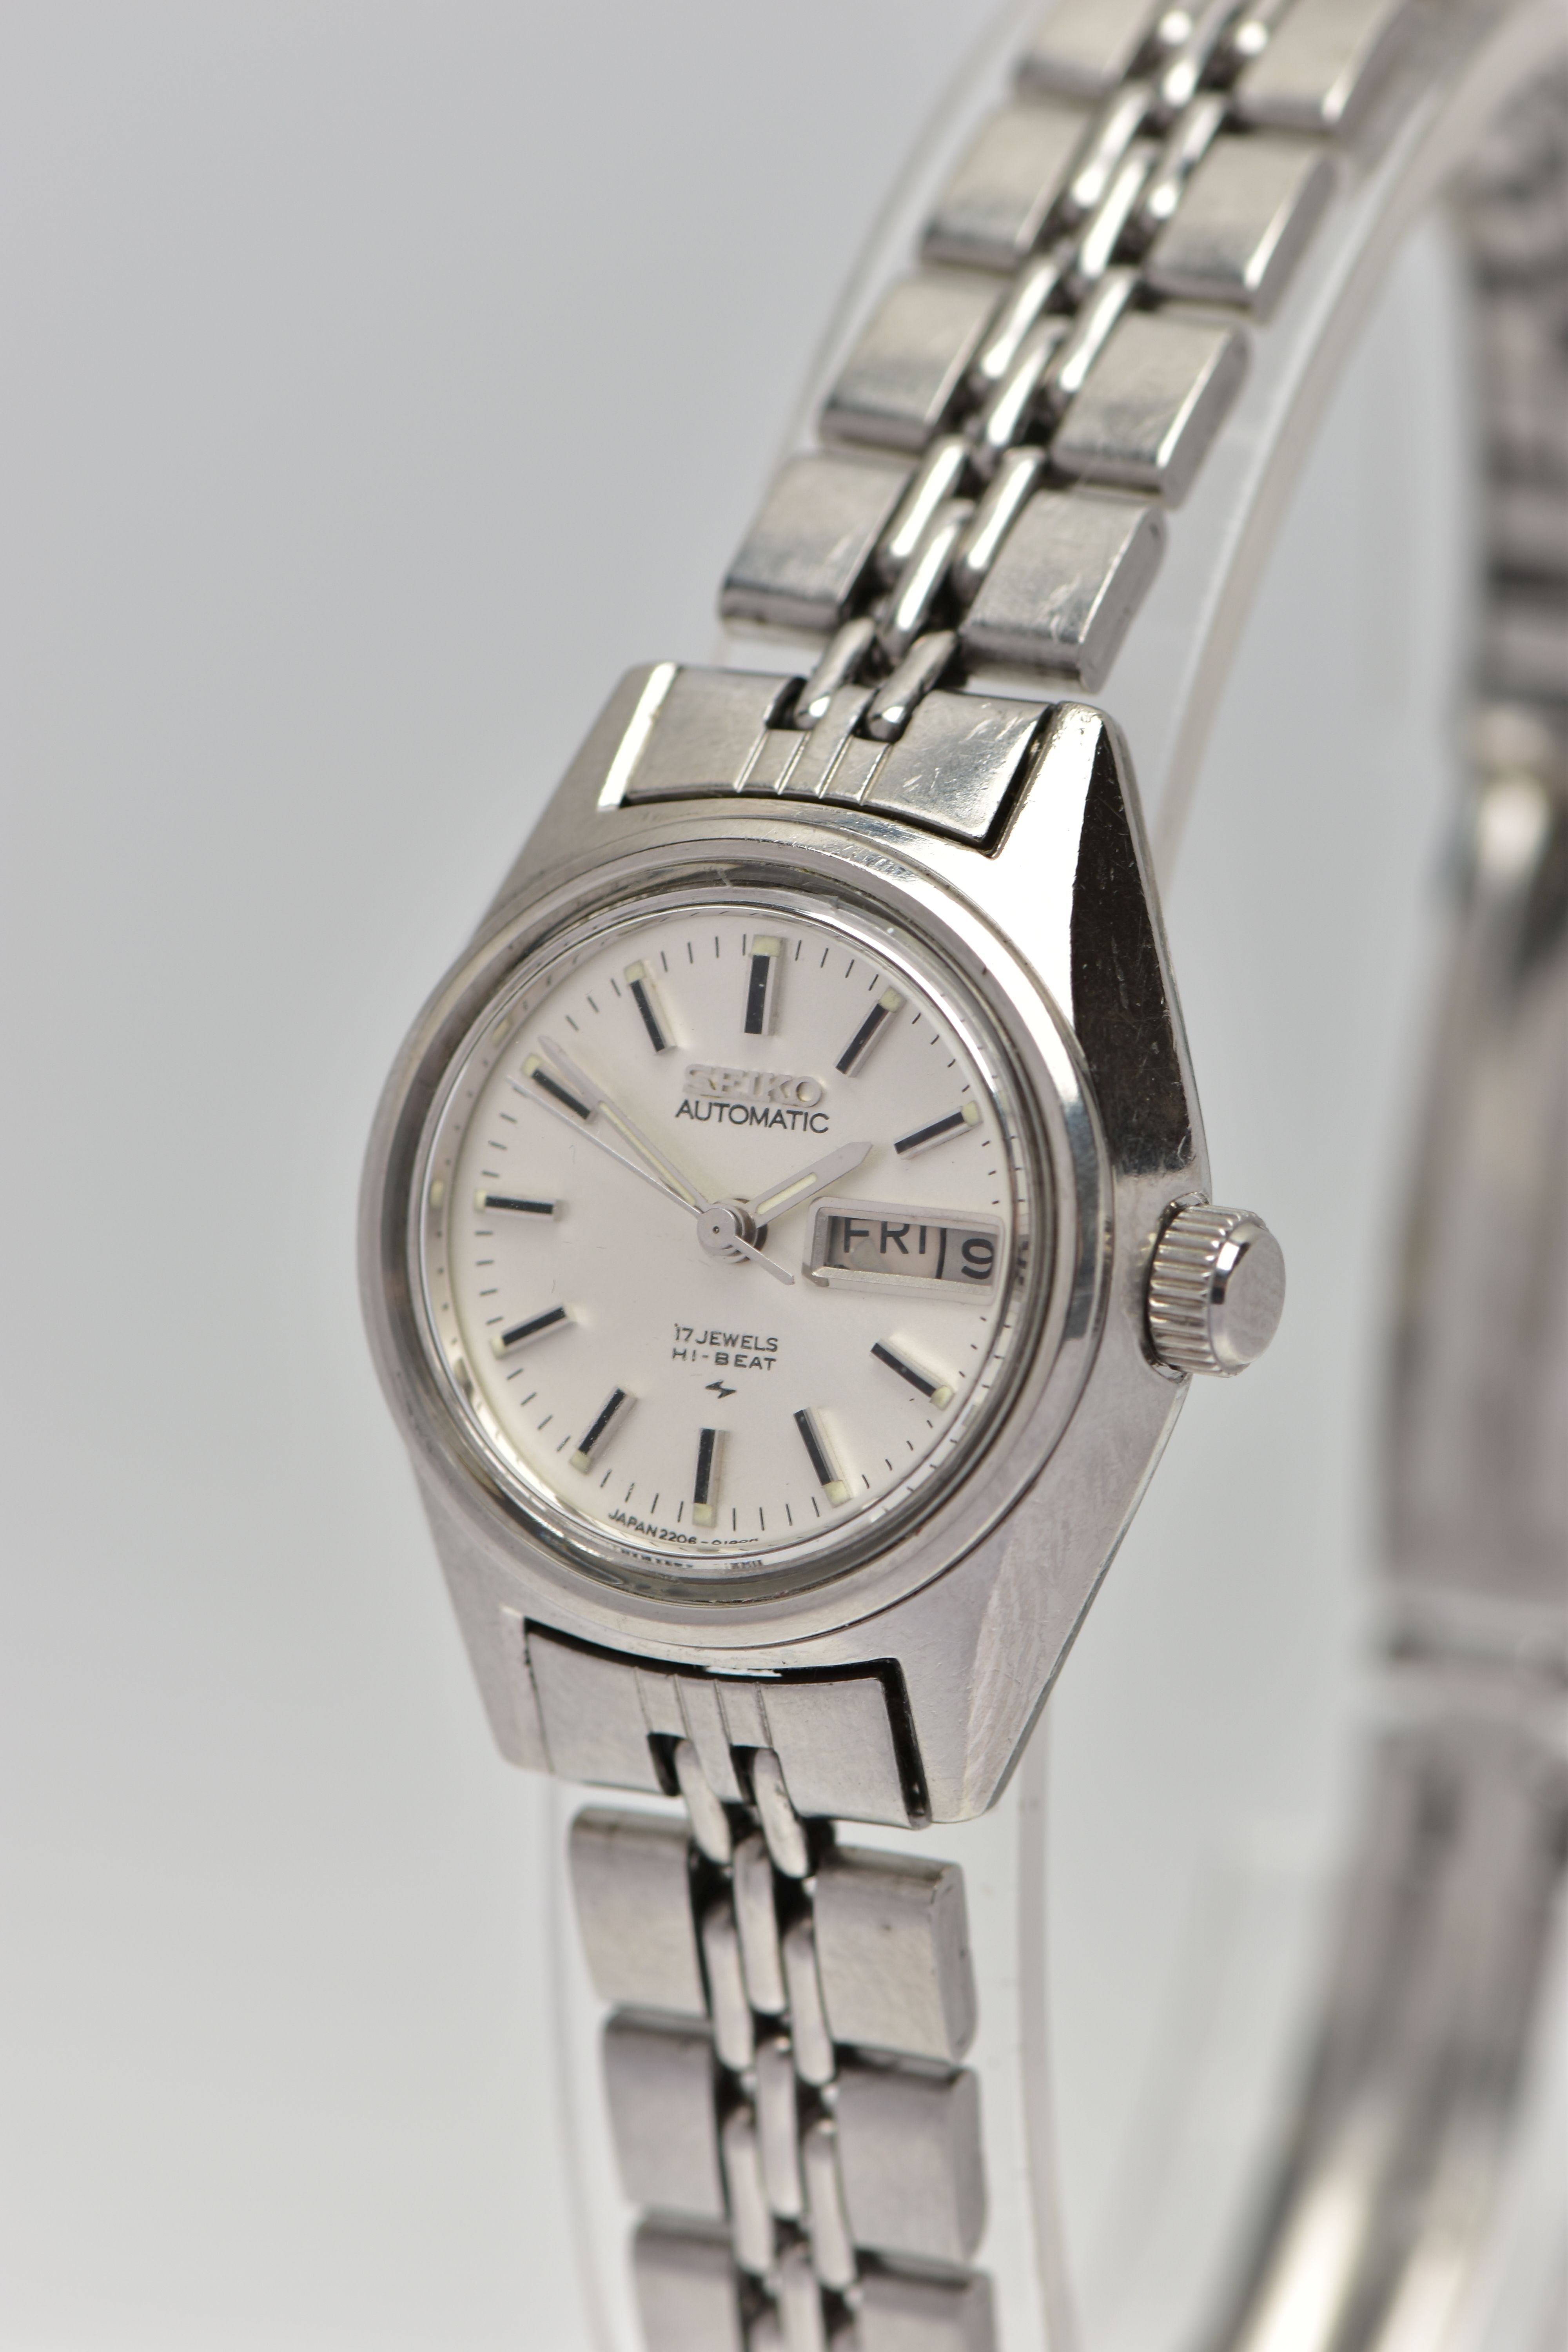 A LADIES 'SEIKO AUTOMATIC' WRISTWATCH, round silver dial signed 'Seiko automatic', day/date window - Image 3 of 6